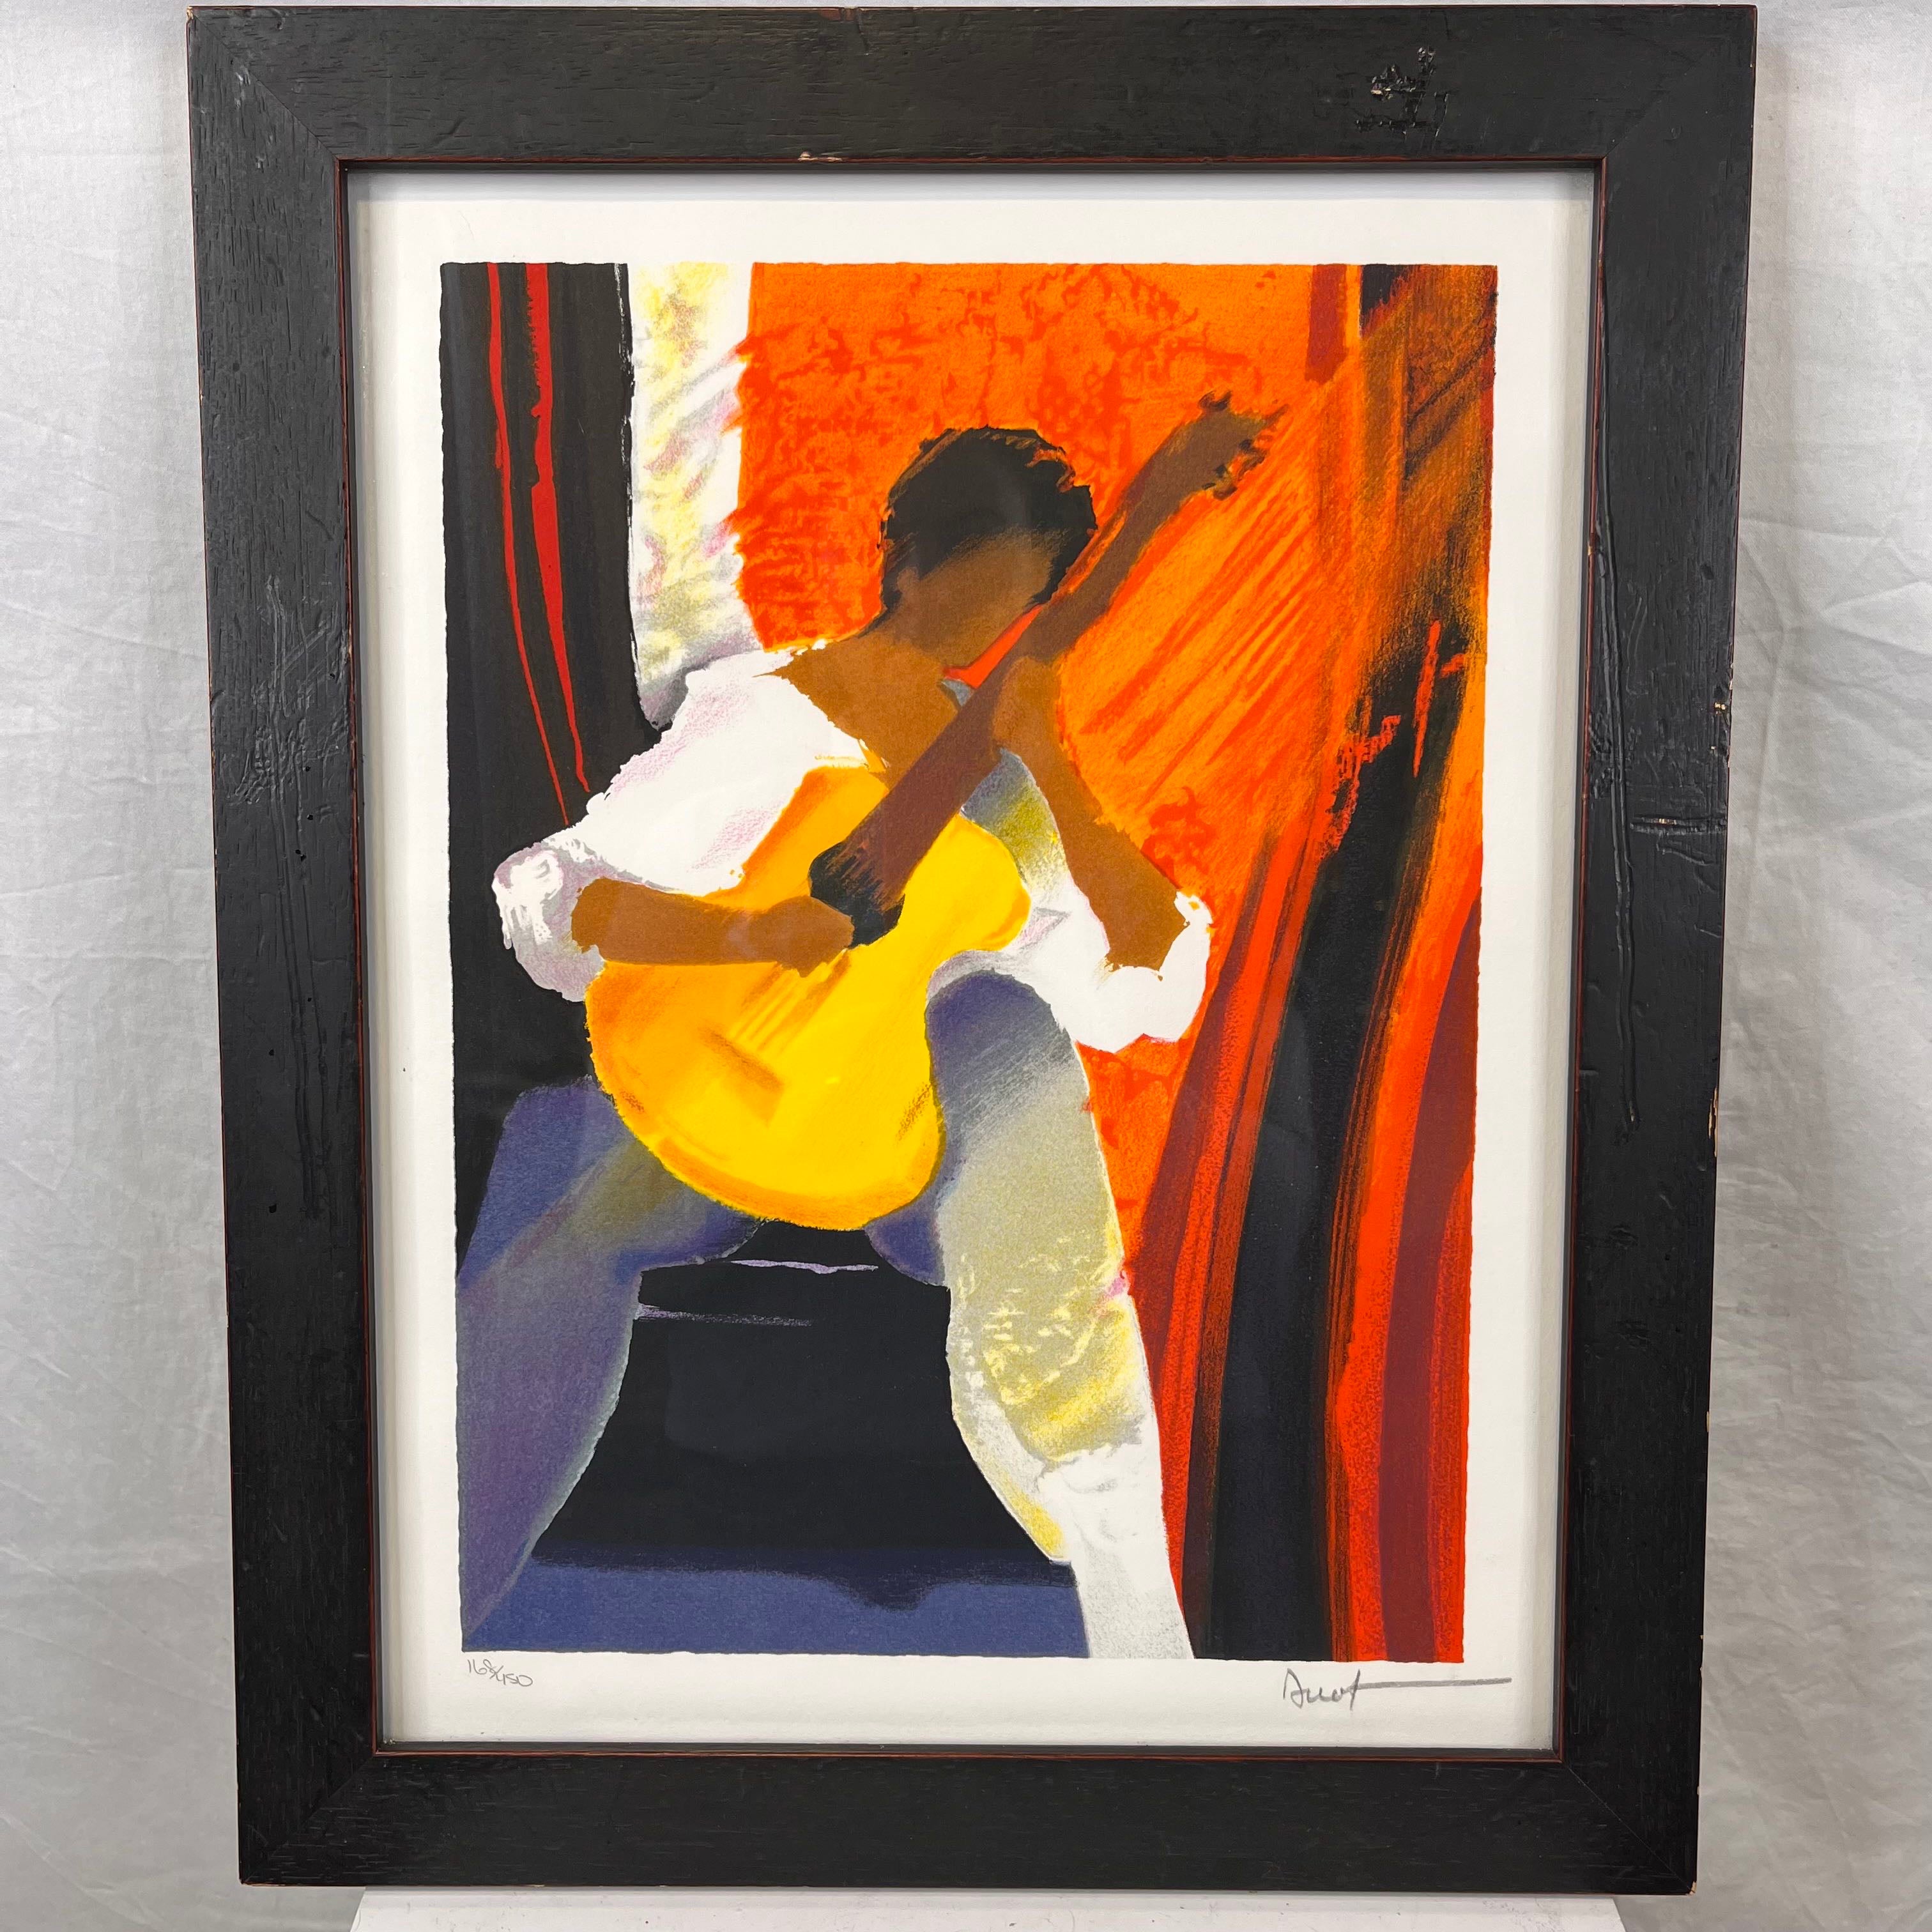 "Musique Chaude" by Emile Bellet, Lithograph in Color on Wove Paper. Signed in Pencil Wall Art